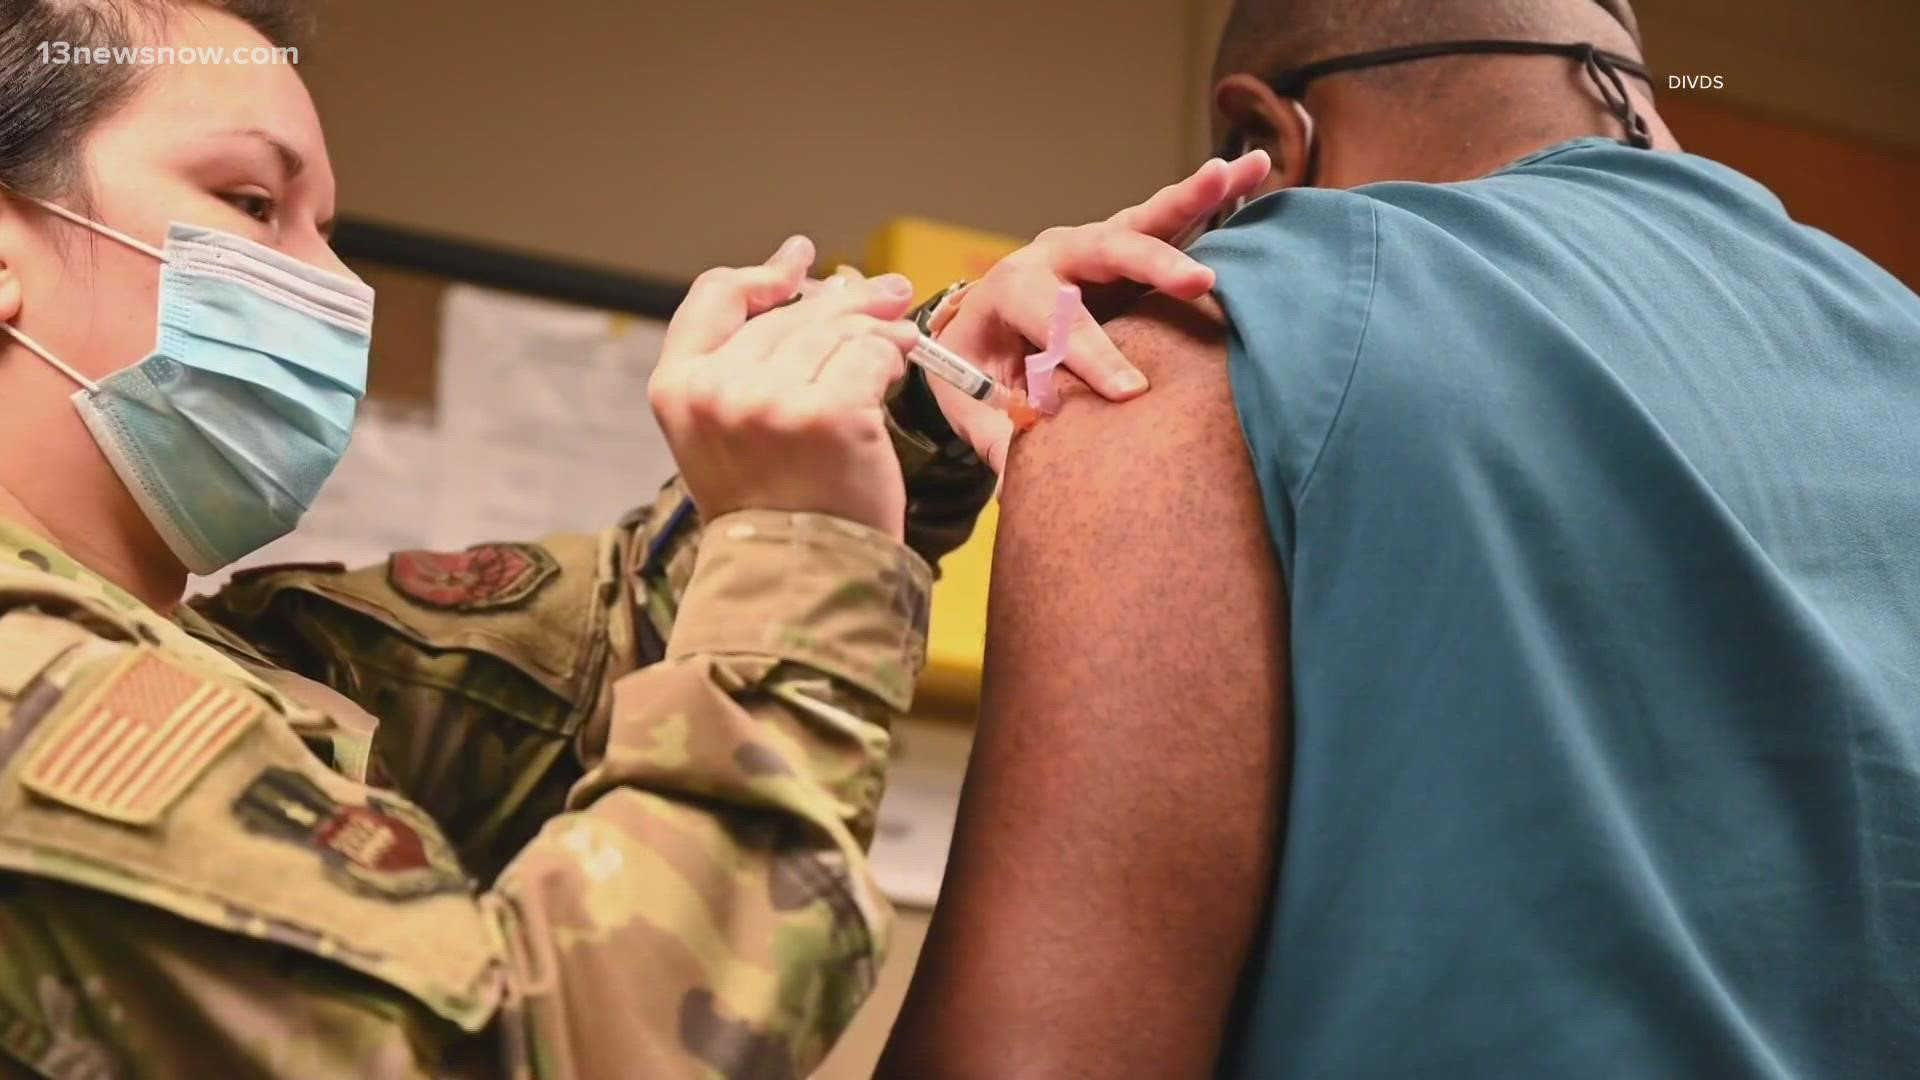 13News Now's Mike Gooding looks at the latest information available on vaccine requirements for military members.